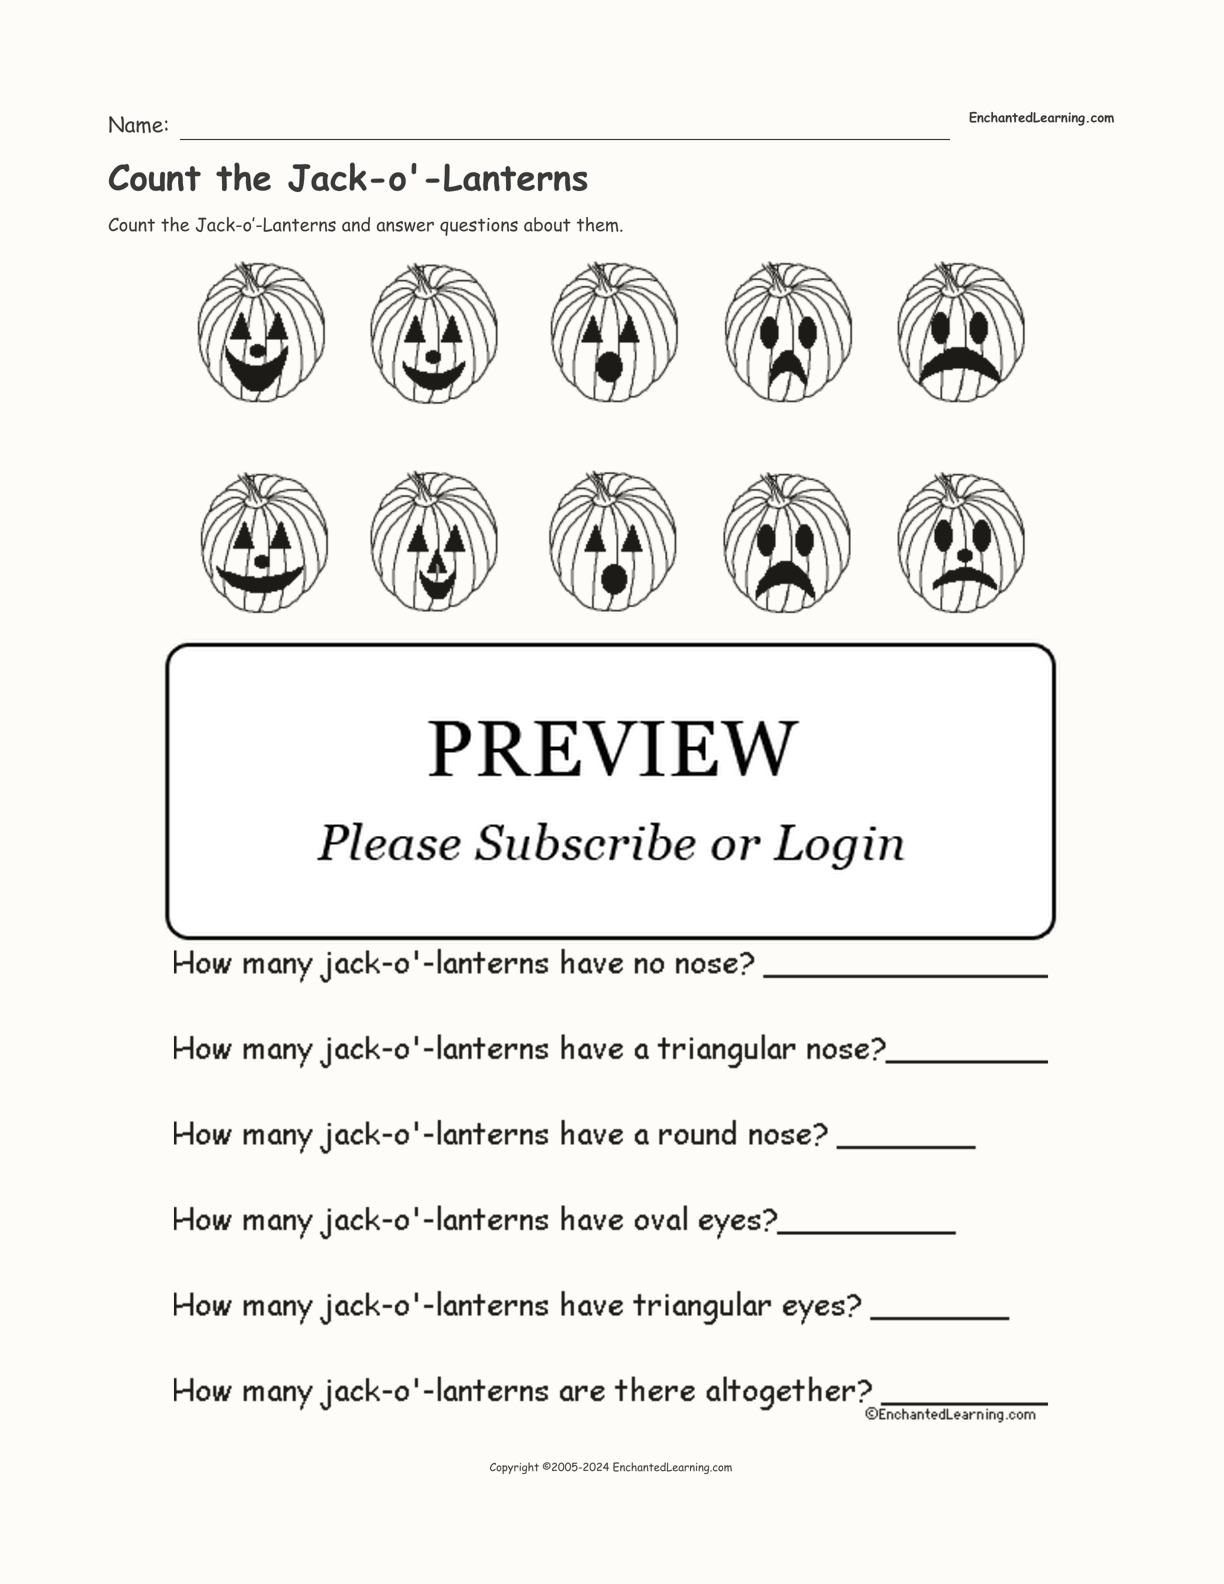 Count the Jack-o'-Lanterns interactive worksheet page 1